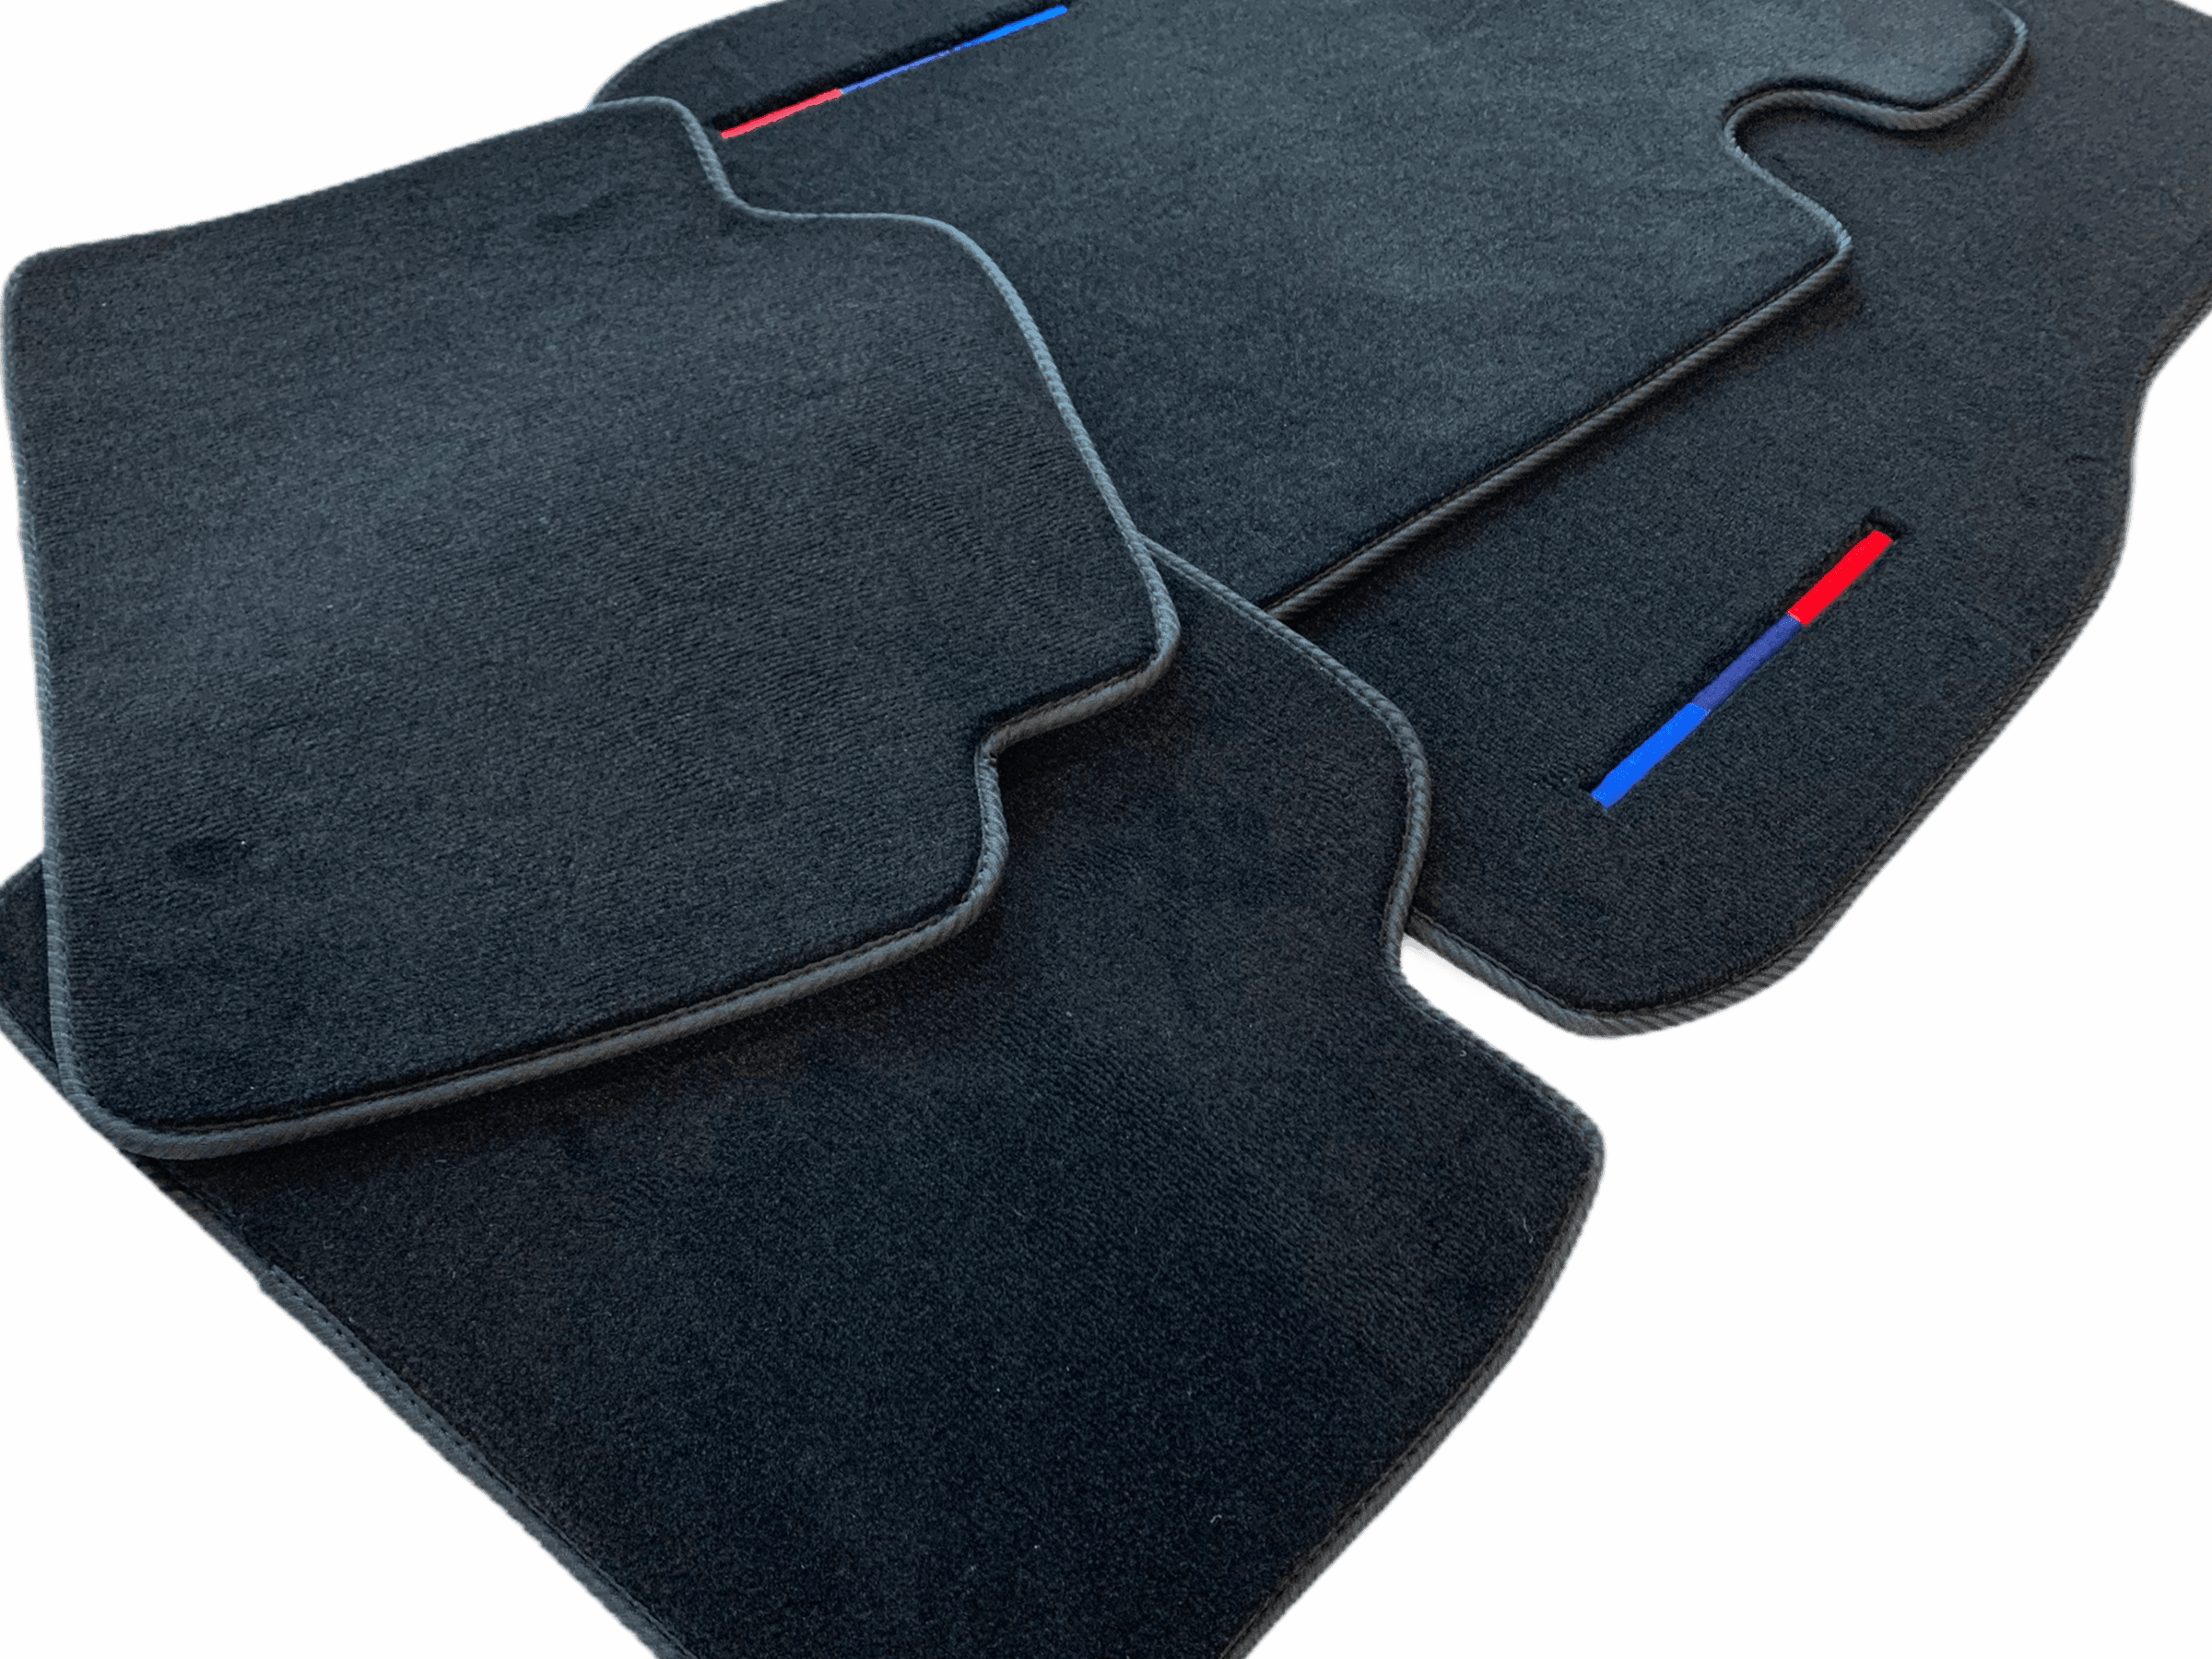 Black Floor Mats For BMW X5M E70 SUV With 3 Color Stripes Tailored Set Perfect Fit - AutoWin